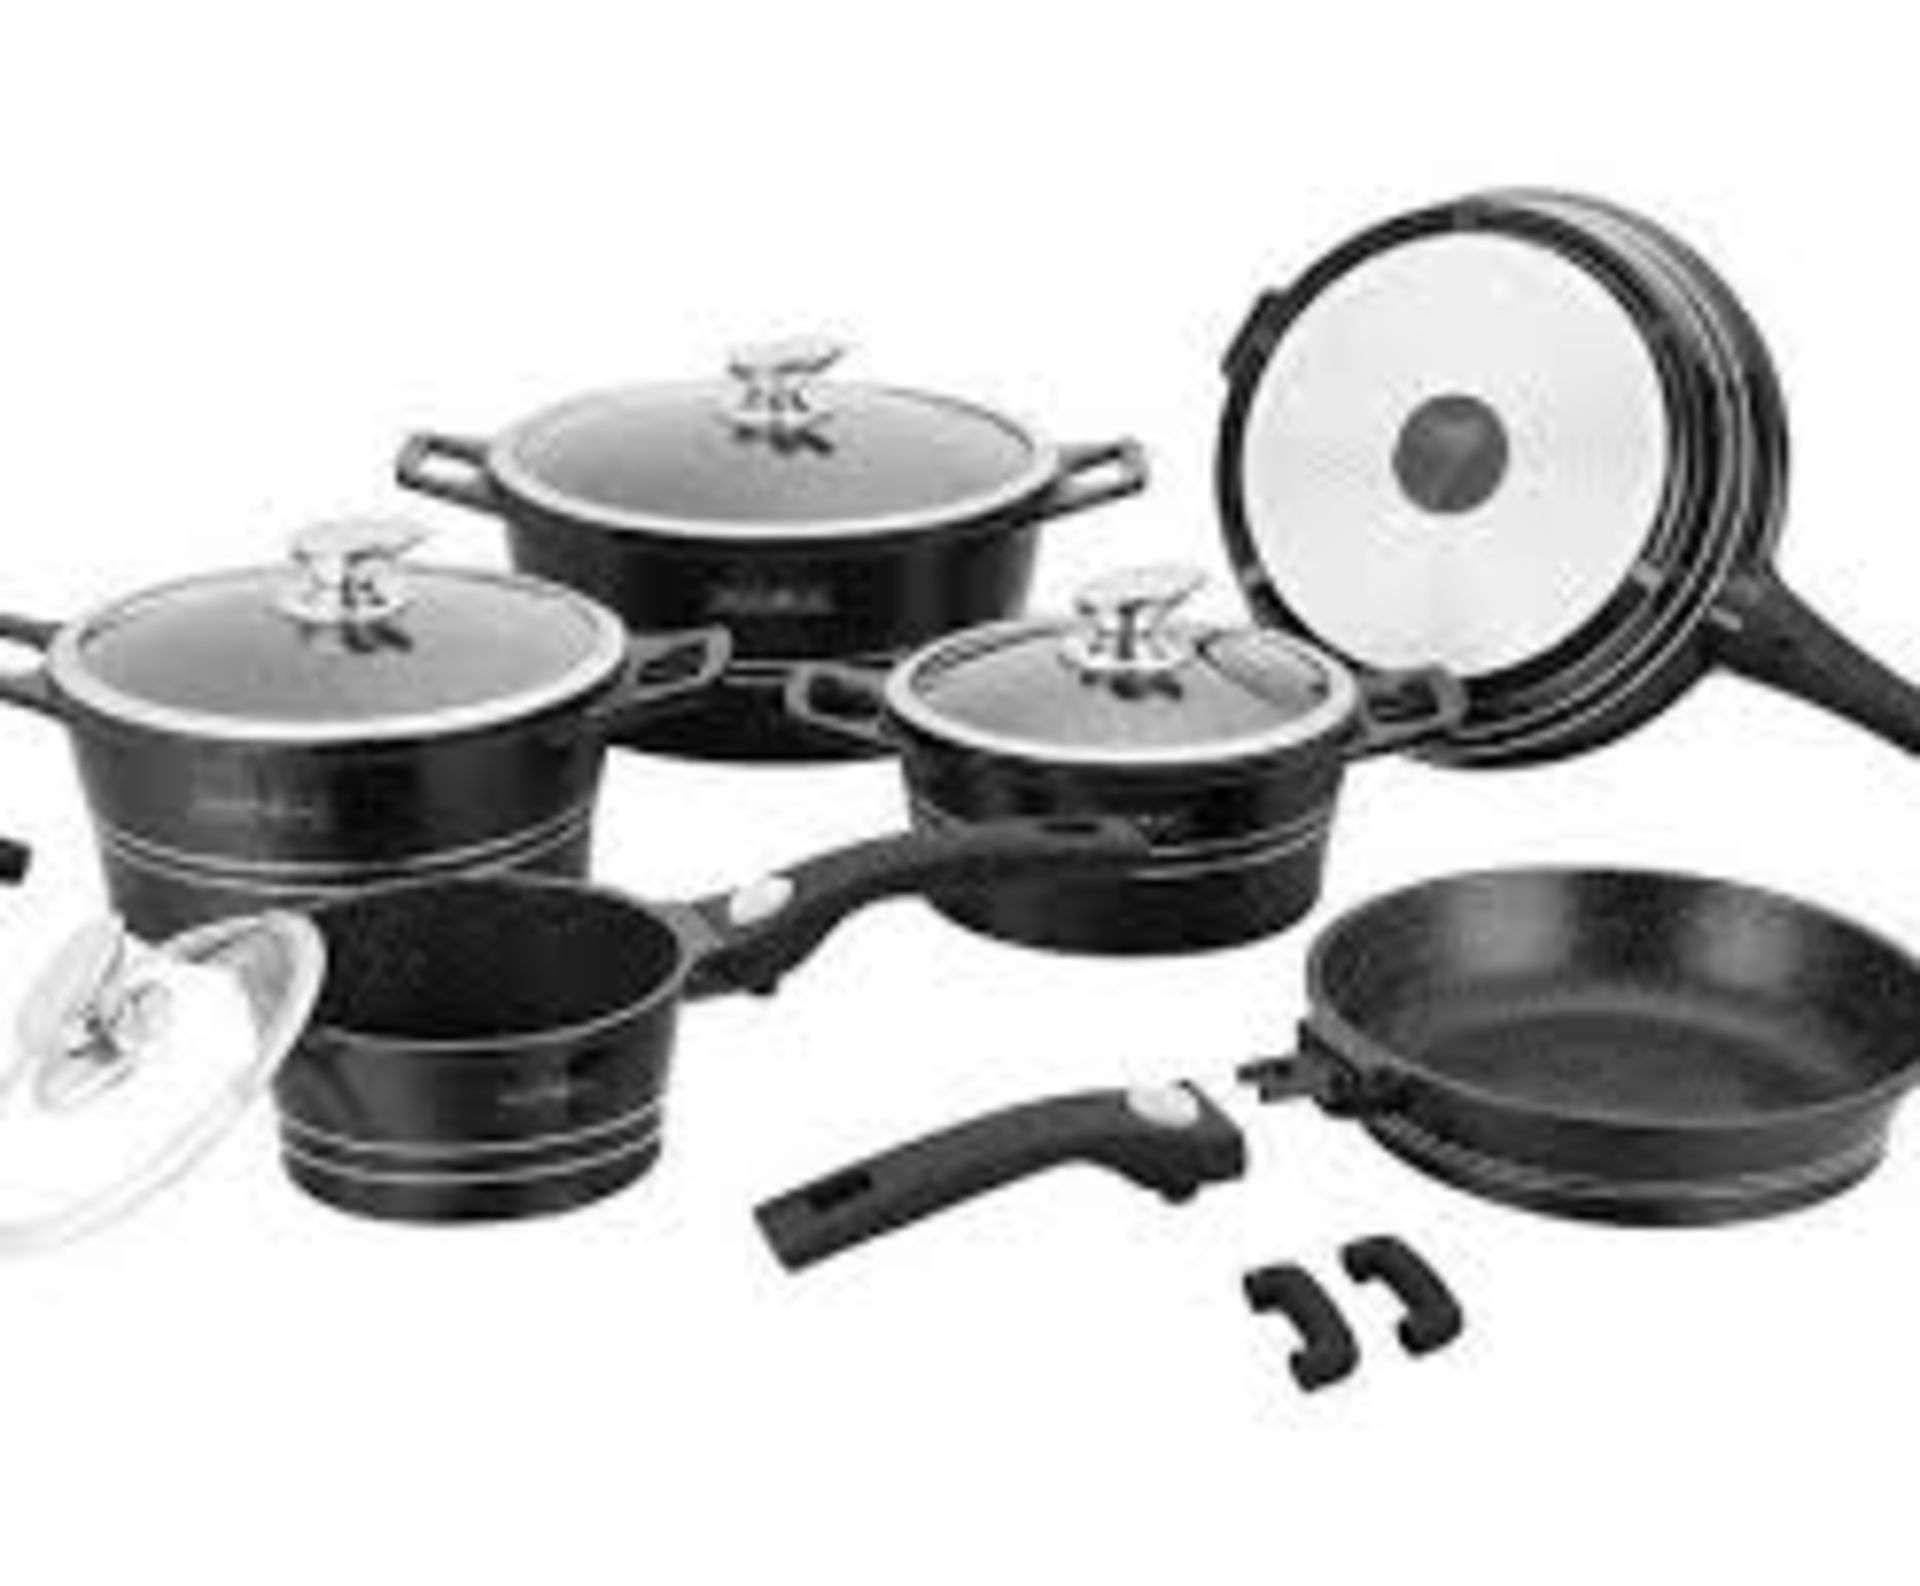 V Brand New Ten Piece Forged Marble Saucepan Set Including Two Frying Pans-Stock Pots ETC X 2 YOUR